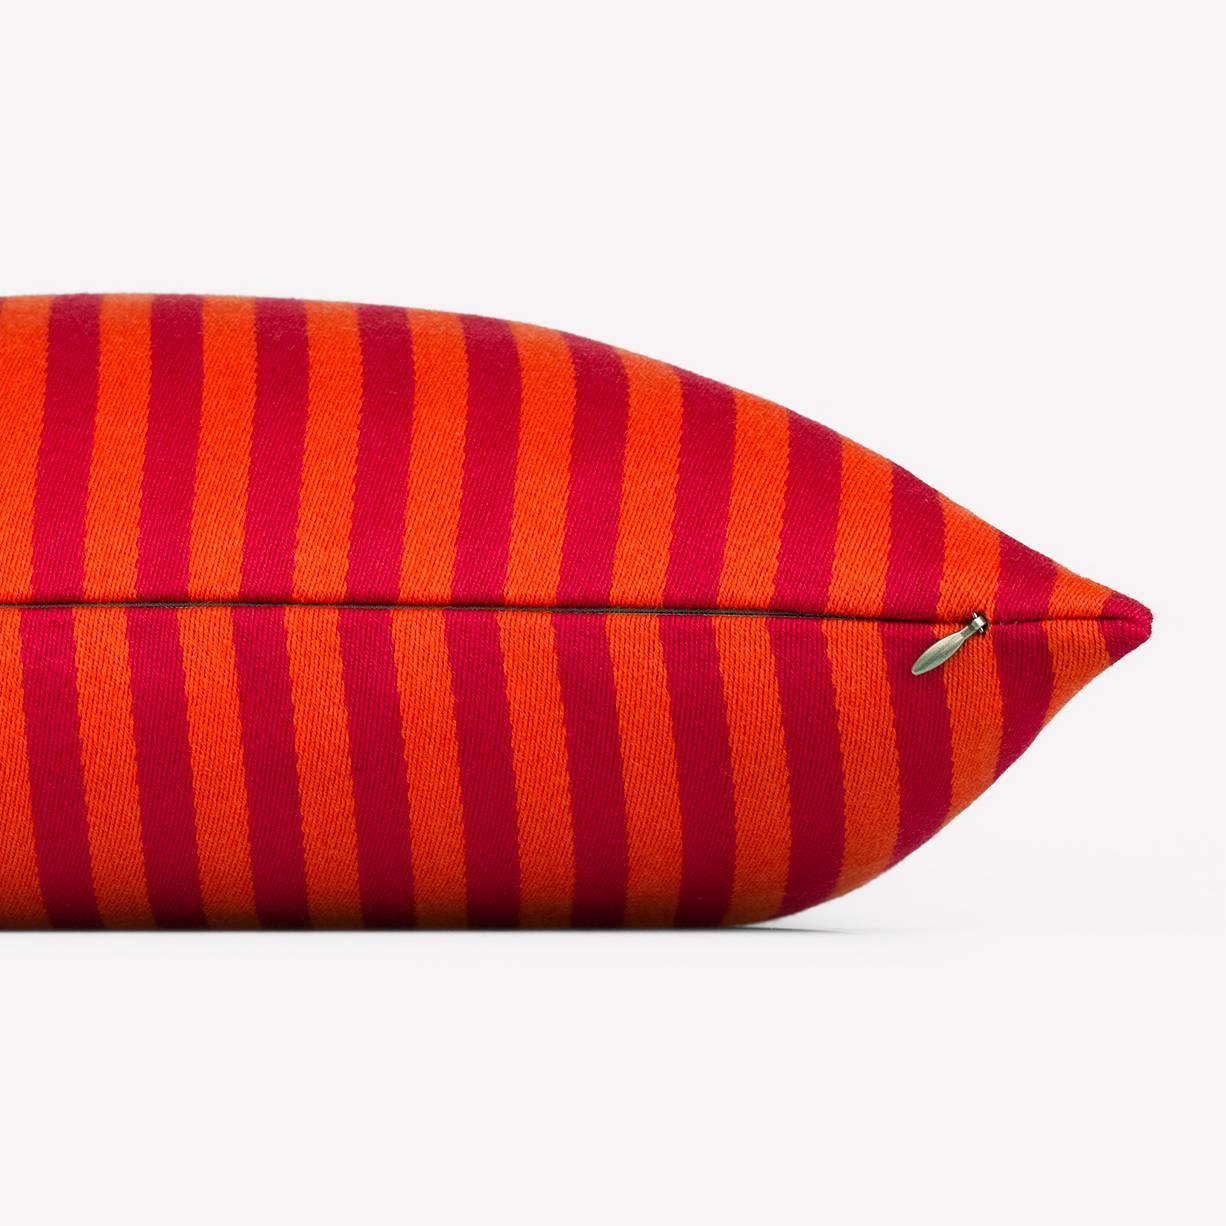 Maharam Pillow
Toostripe by Alexander Girard
001 Orange

Alexander Girard drew inspiration from his travels to Mexico and India, as well as from his fascination with tradition fold art. First designed for the Herman Miller Textile Division in 1965,